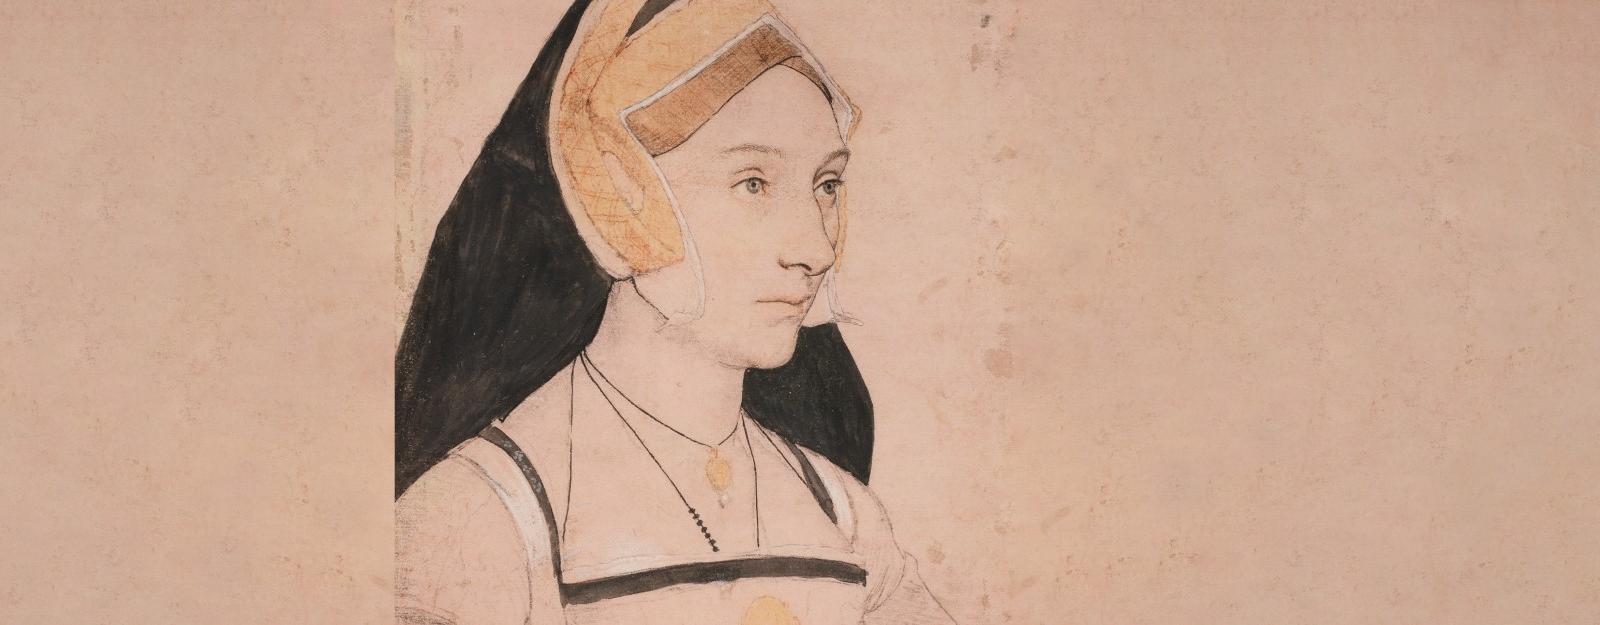 A portrait drawing of Mary Shelton by Hans Holbein the Younger